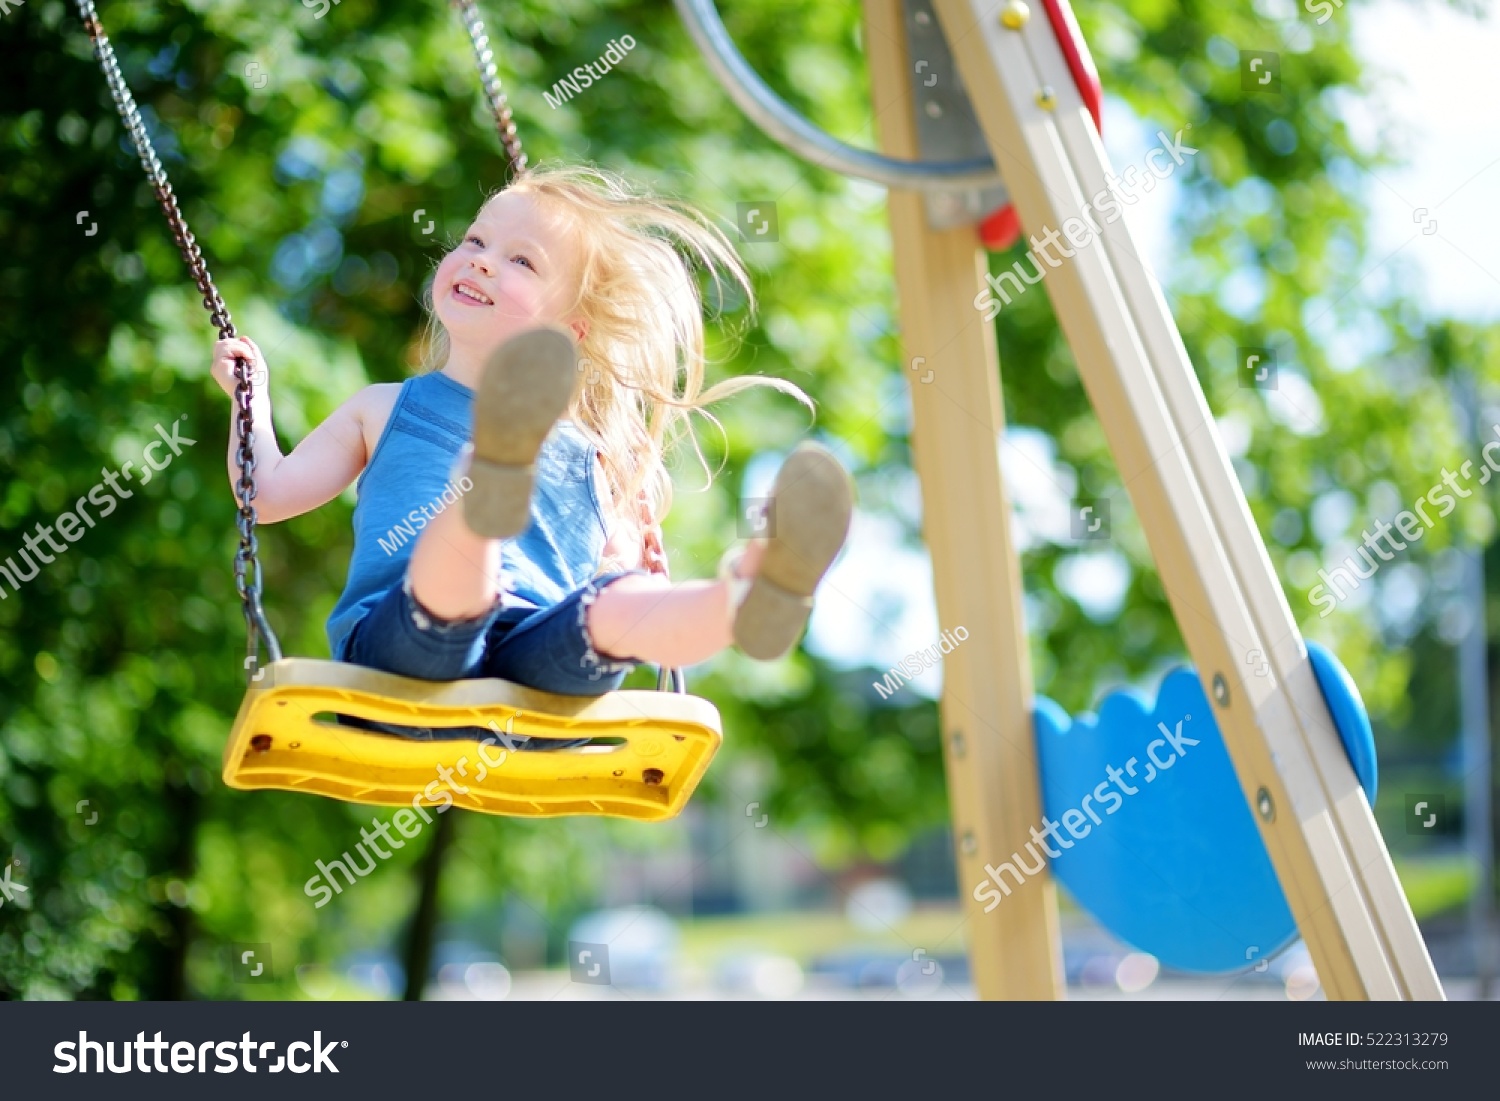 Cute little girl having fun on a playground outdoors in summer #522313279